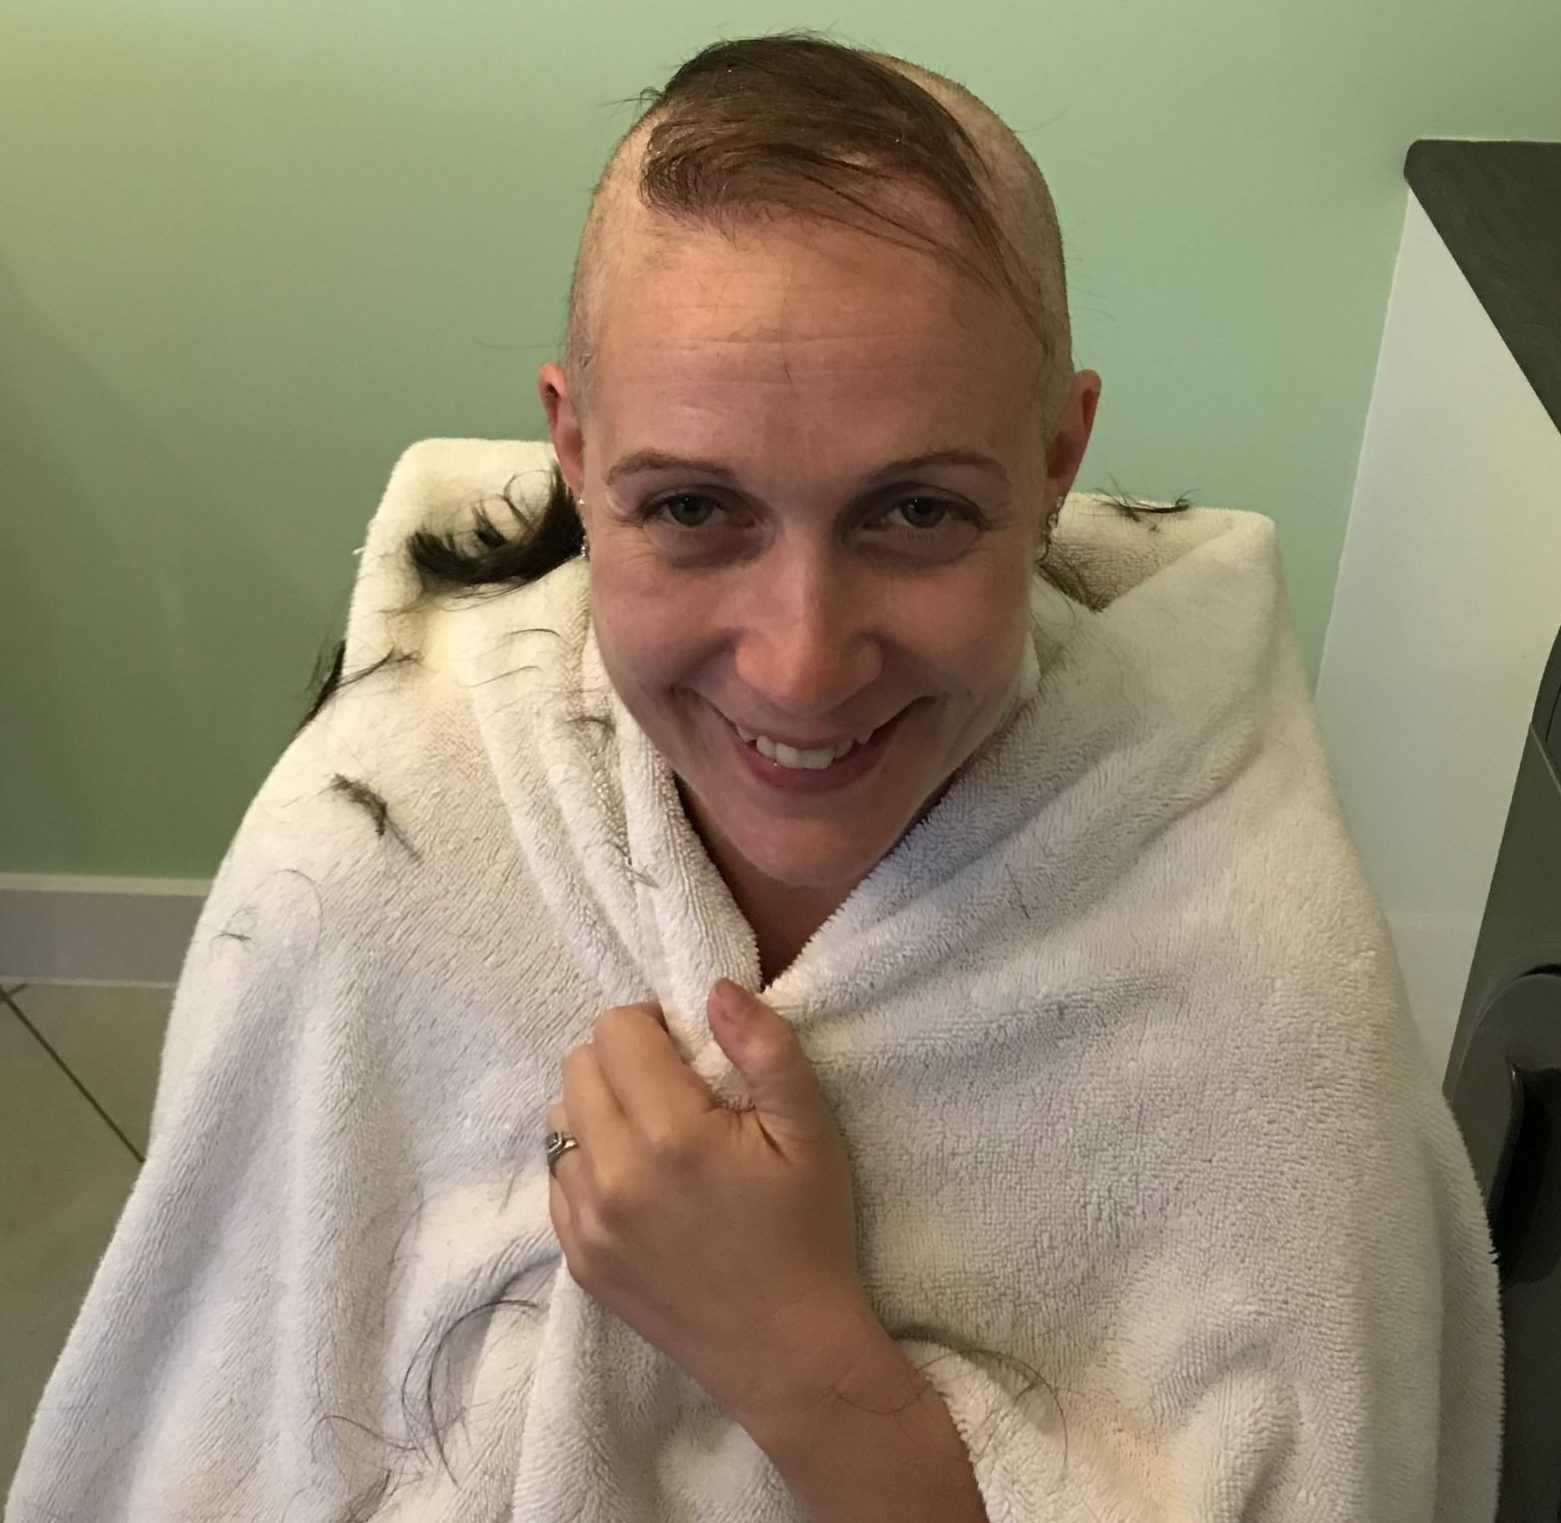 Emma Davies during treatment when she lost her hair